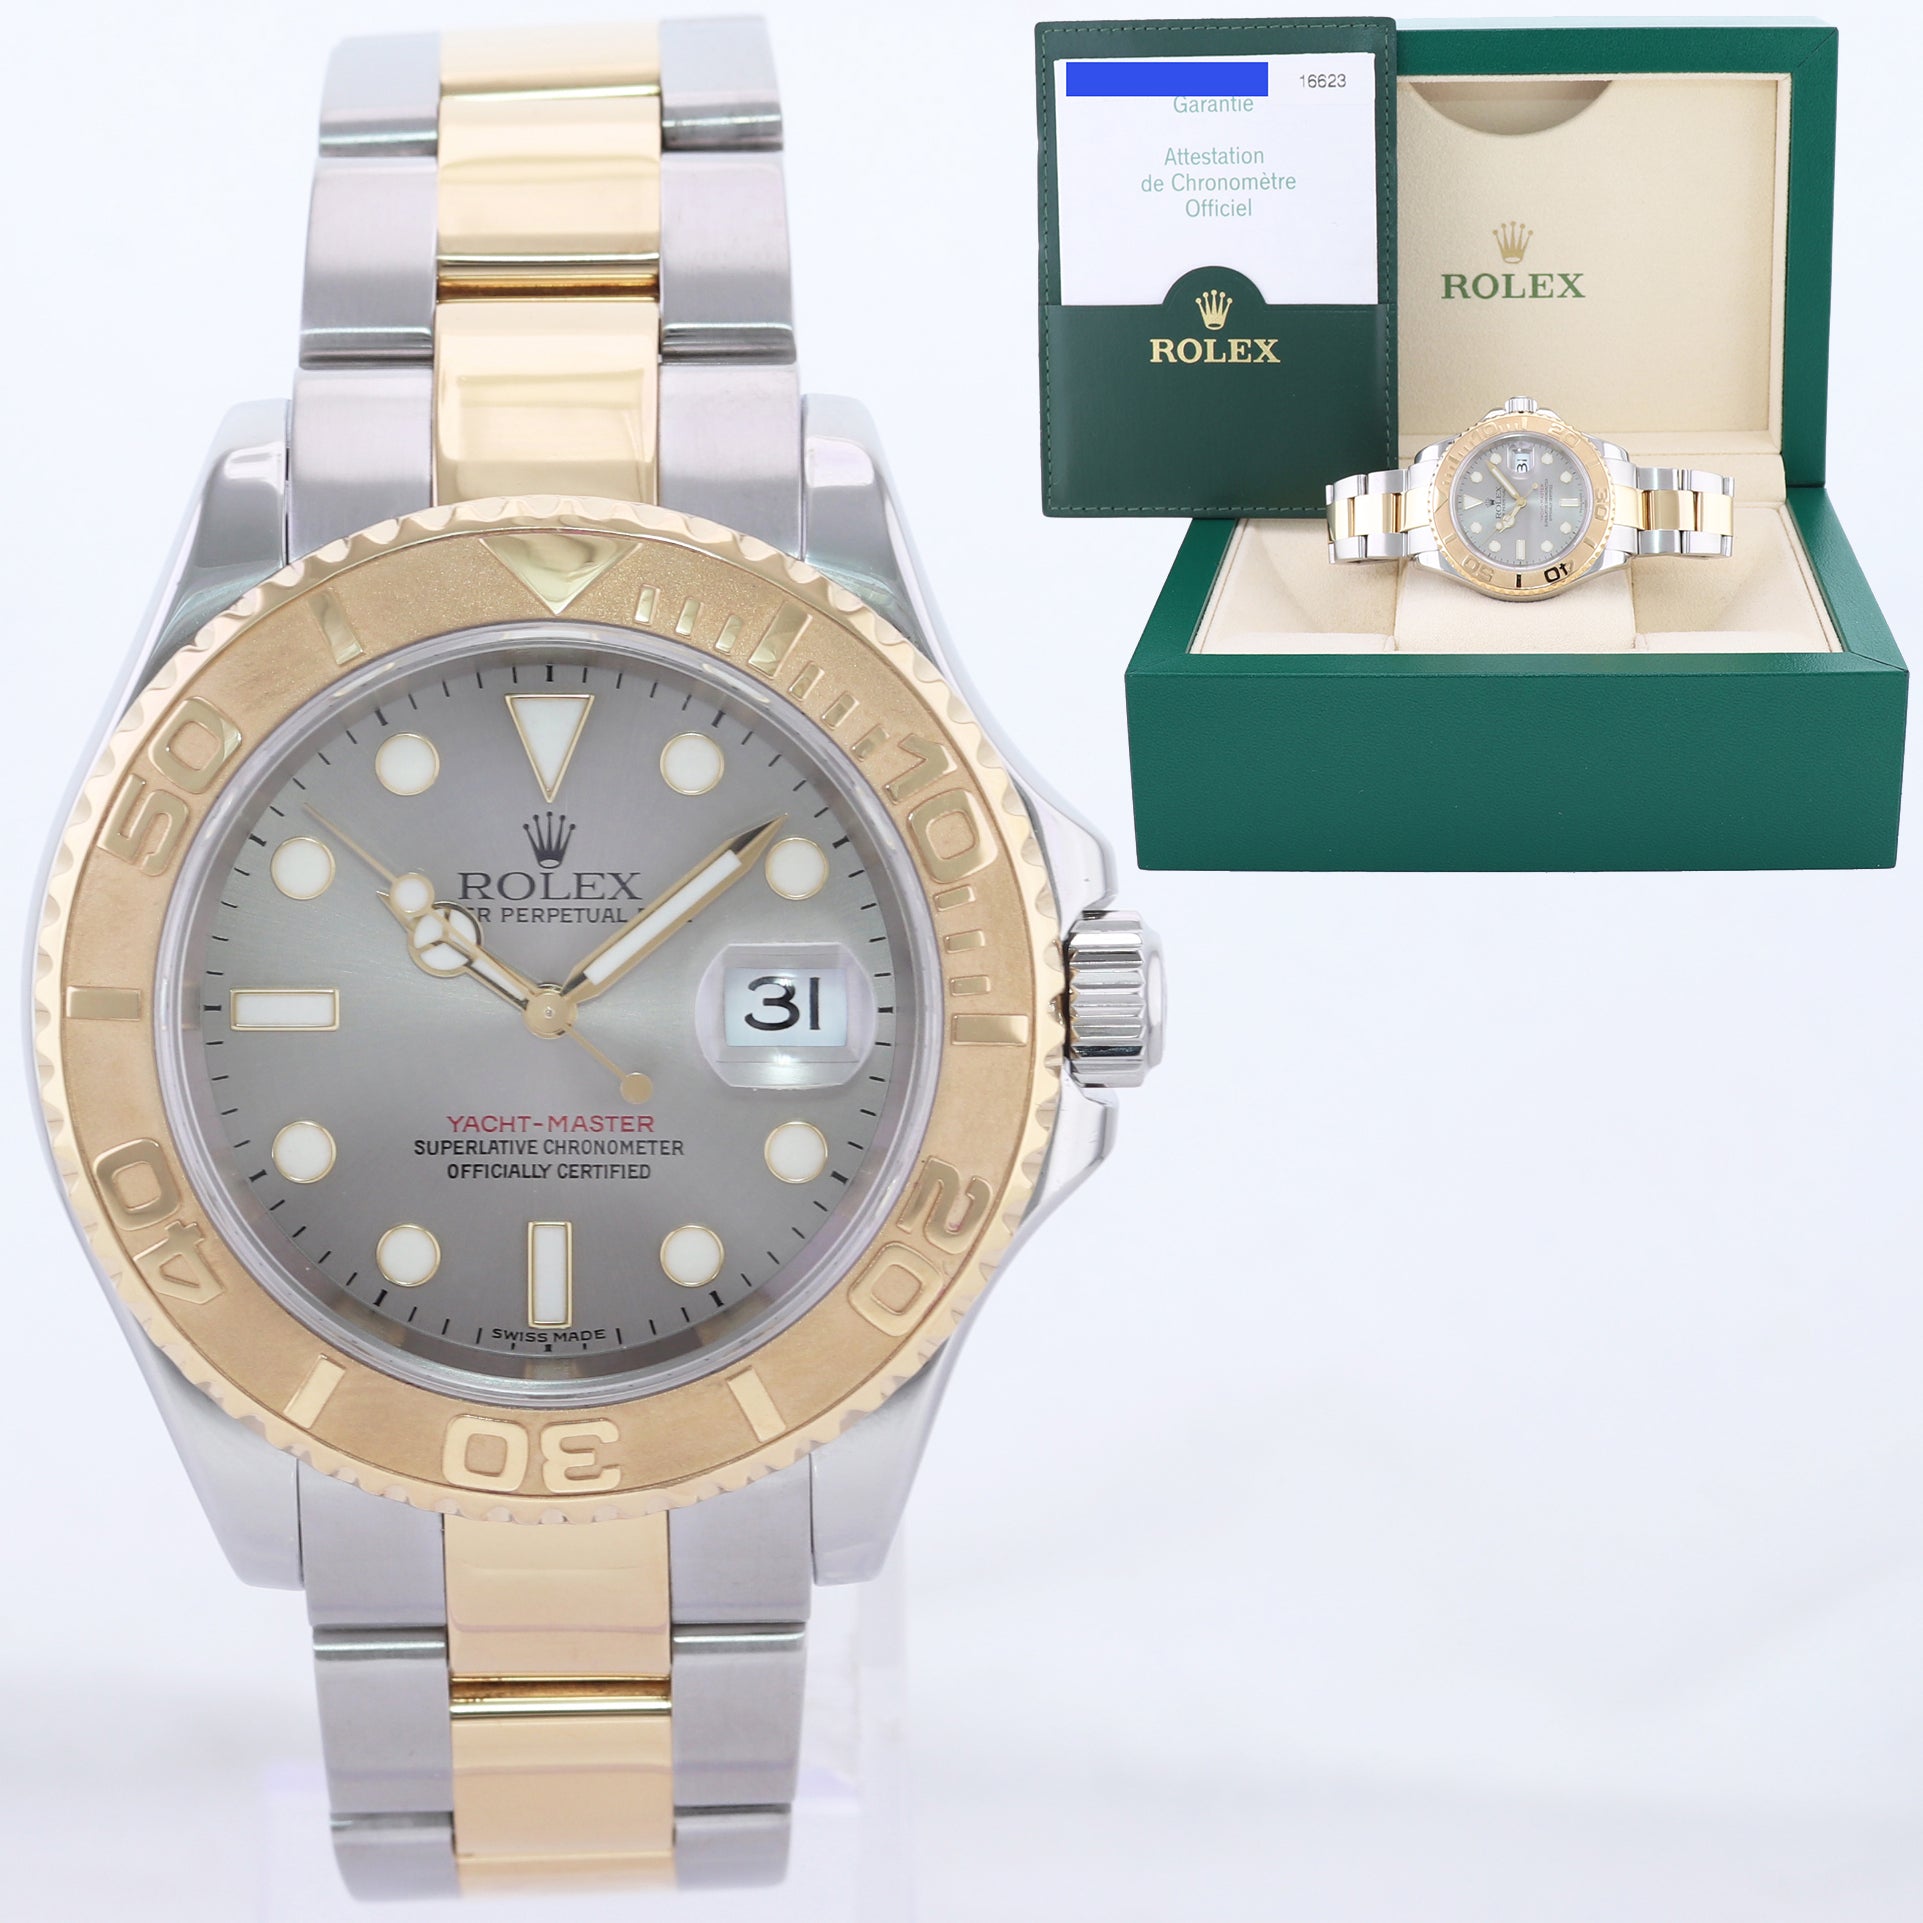 Rolex Yacht-Master 16623 2Tone Oyster 18K Yellow Gold & SS Blue Dial Watch Box/Papers